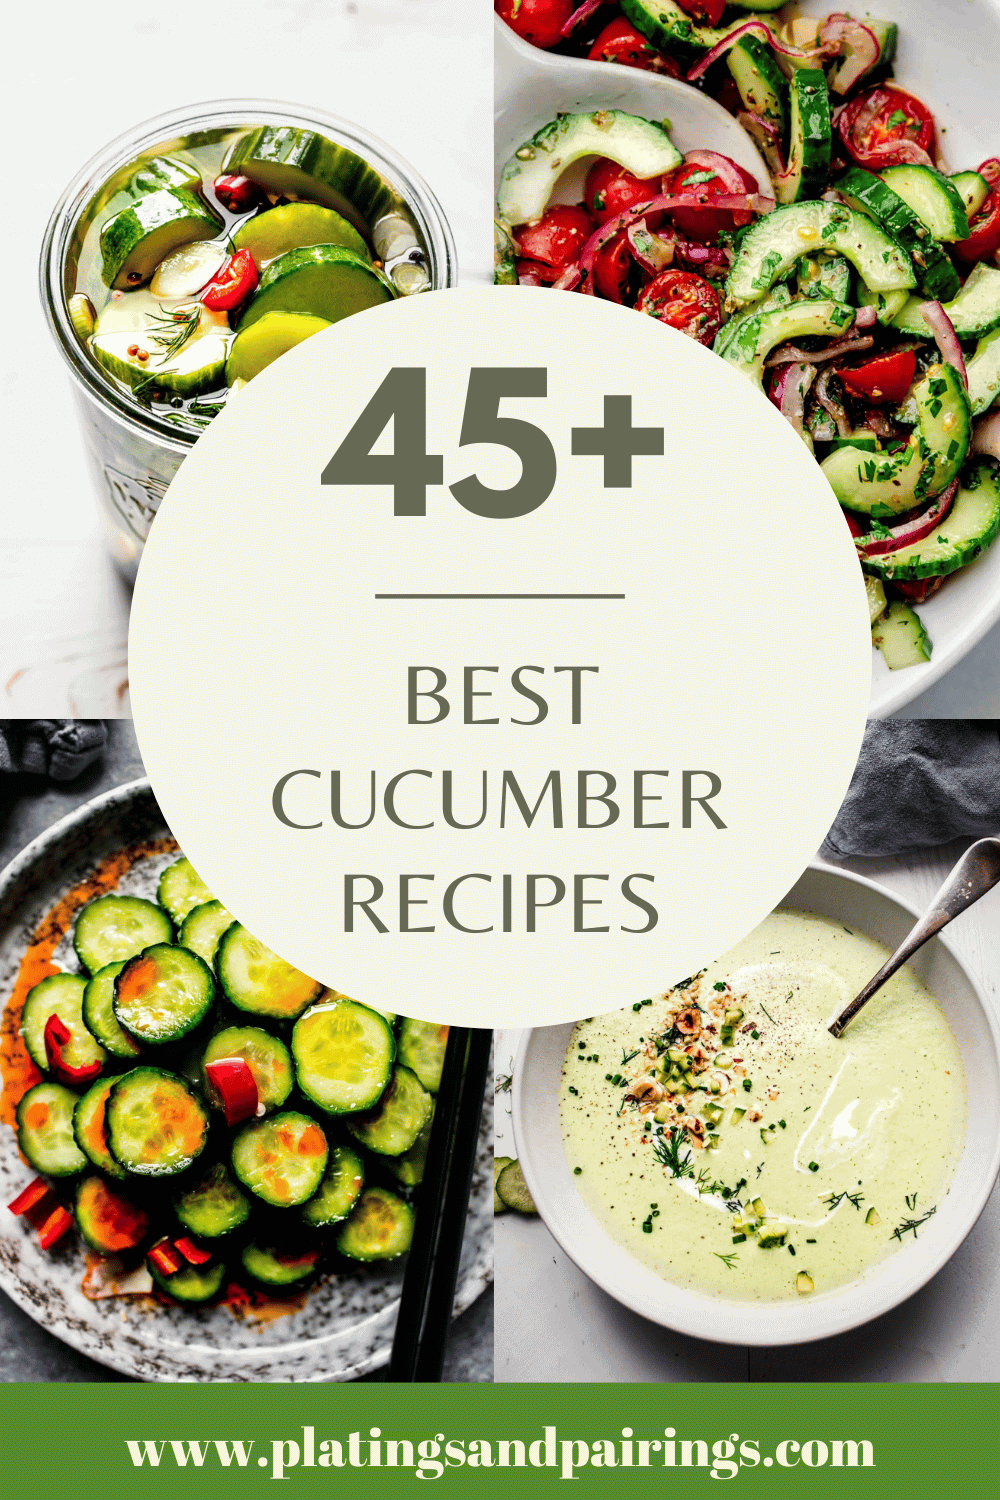 Collage of cucumber recipes with text overlay.